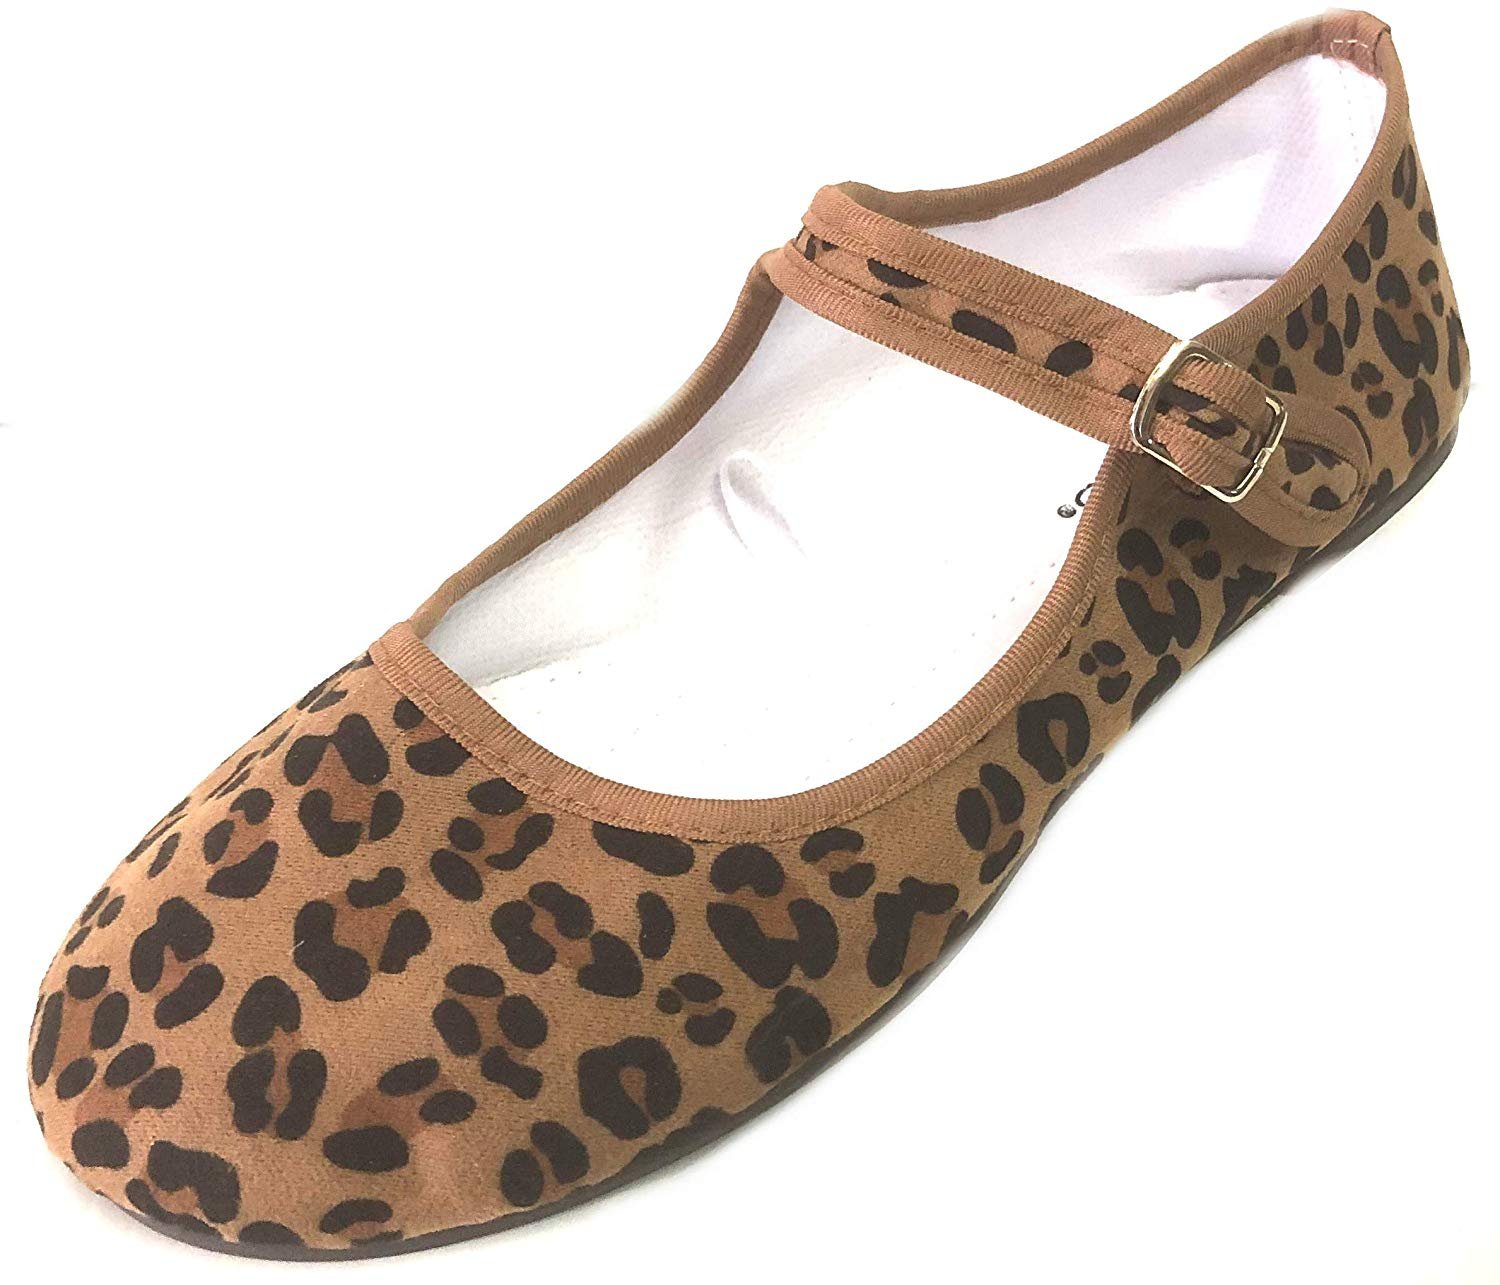 Shoes 18 Womens Cotton China Doll Mary Jane Shoes Ballerina Ballet Flats Shoes 118 Leopard Micro